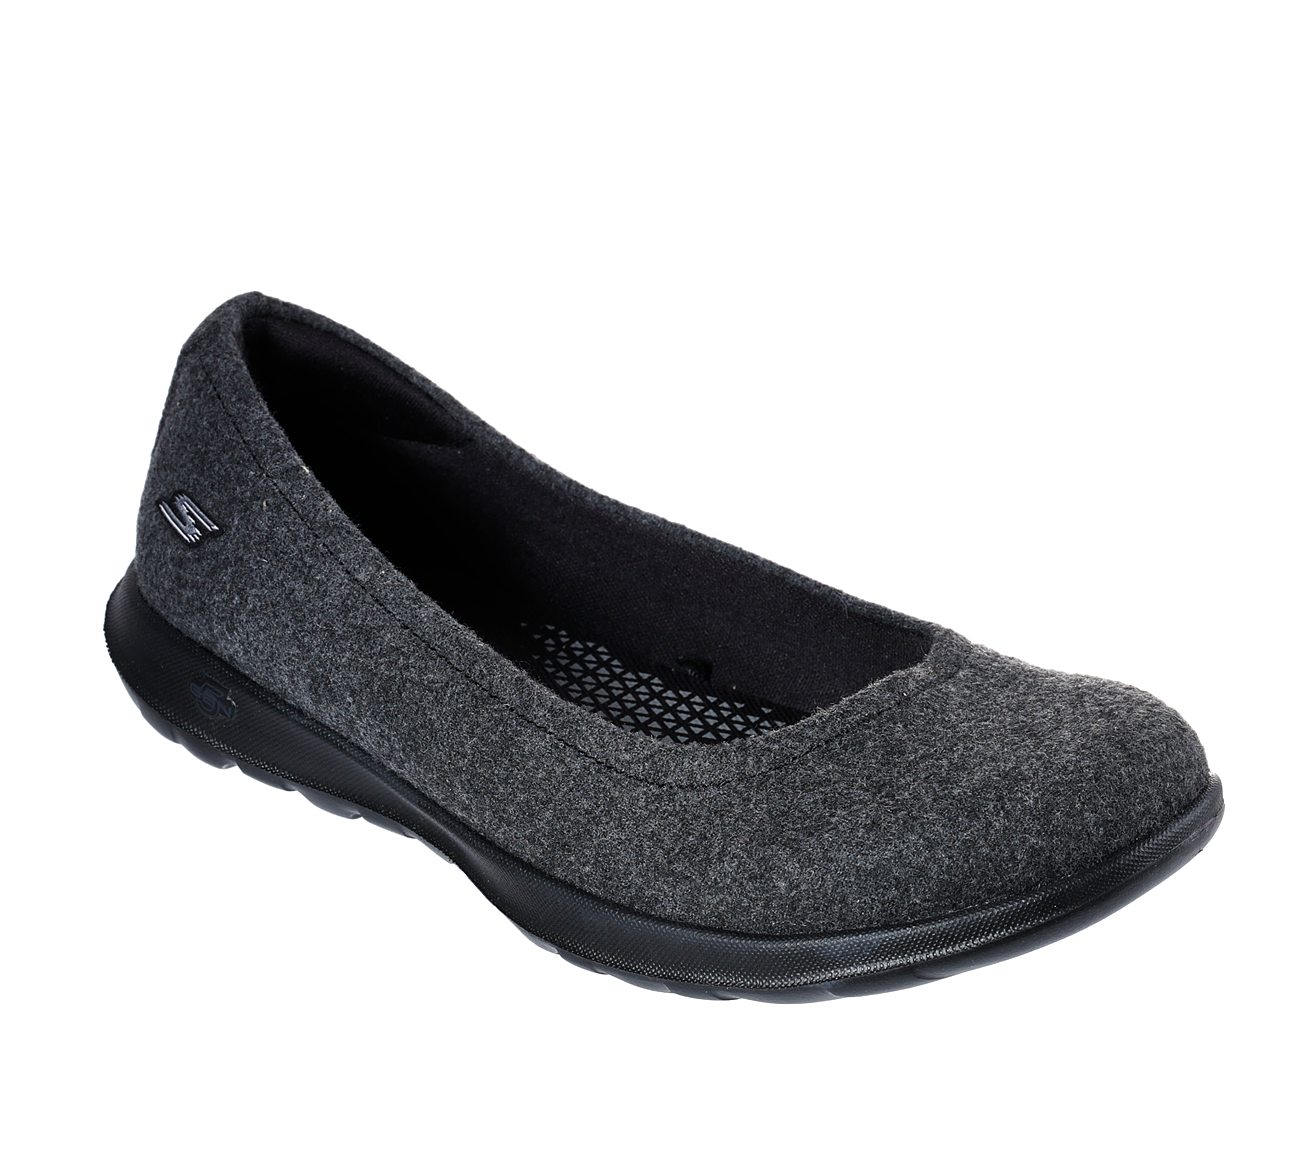 skechers dolly shoes